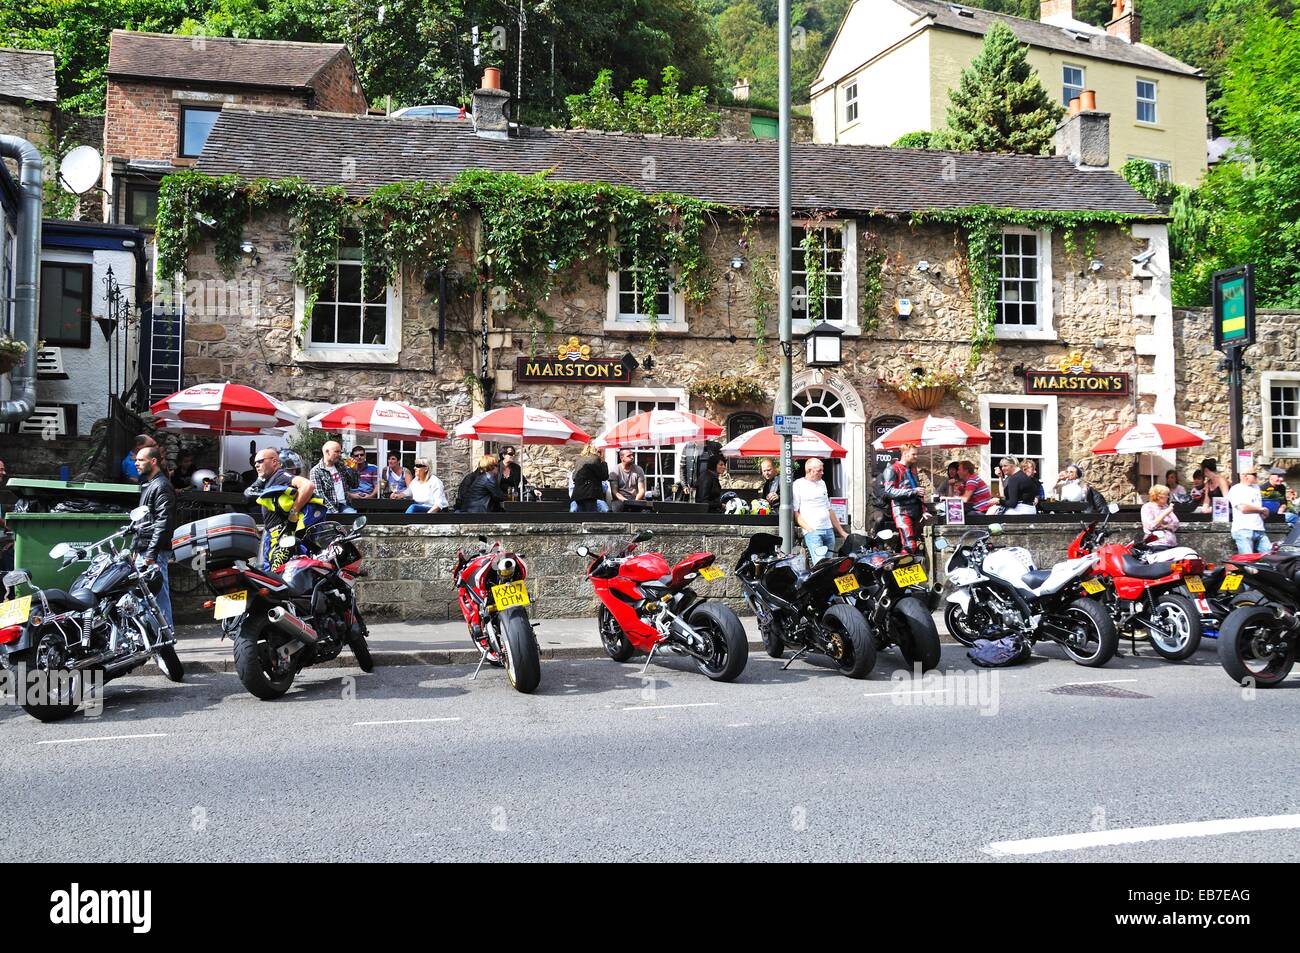 Motor cyclists outside a Marstons pub in the town centre, Matlock Bath, Derbyshire, England, UK, Western Europe. Stock Photo